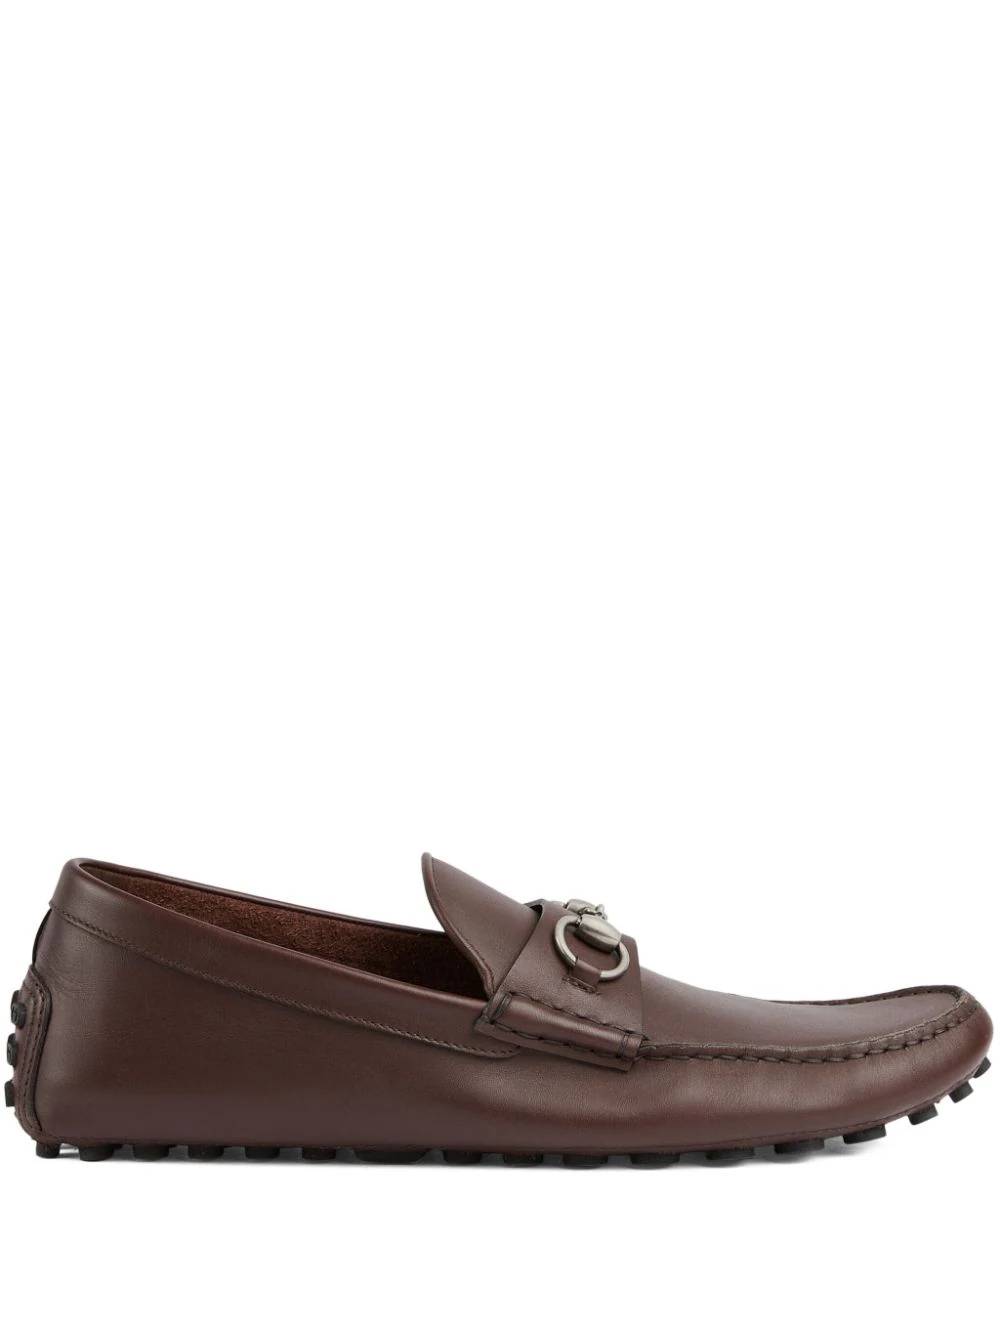 Gucci Man Flat Shoe Cocoa 765859 In Brown